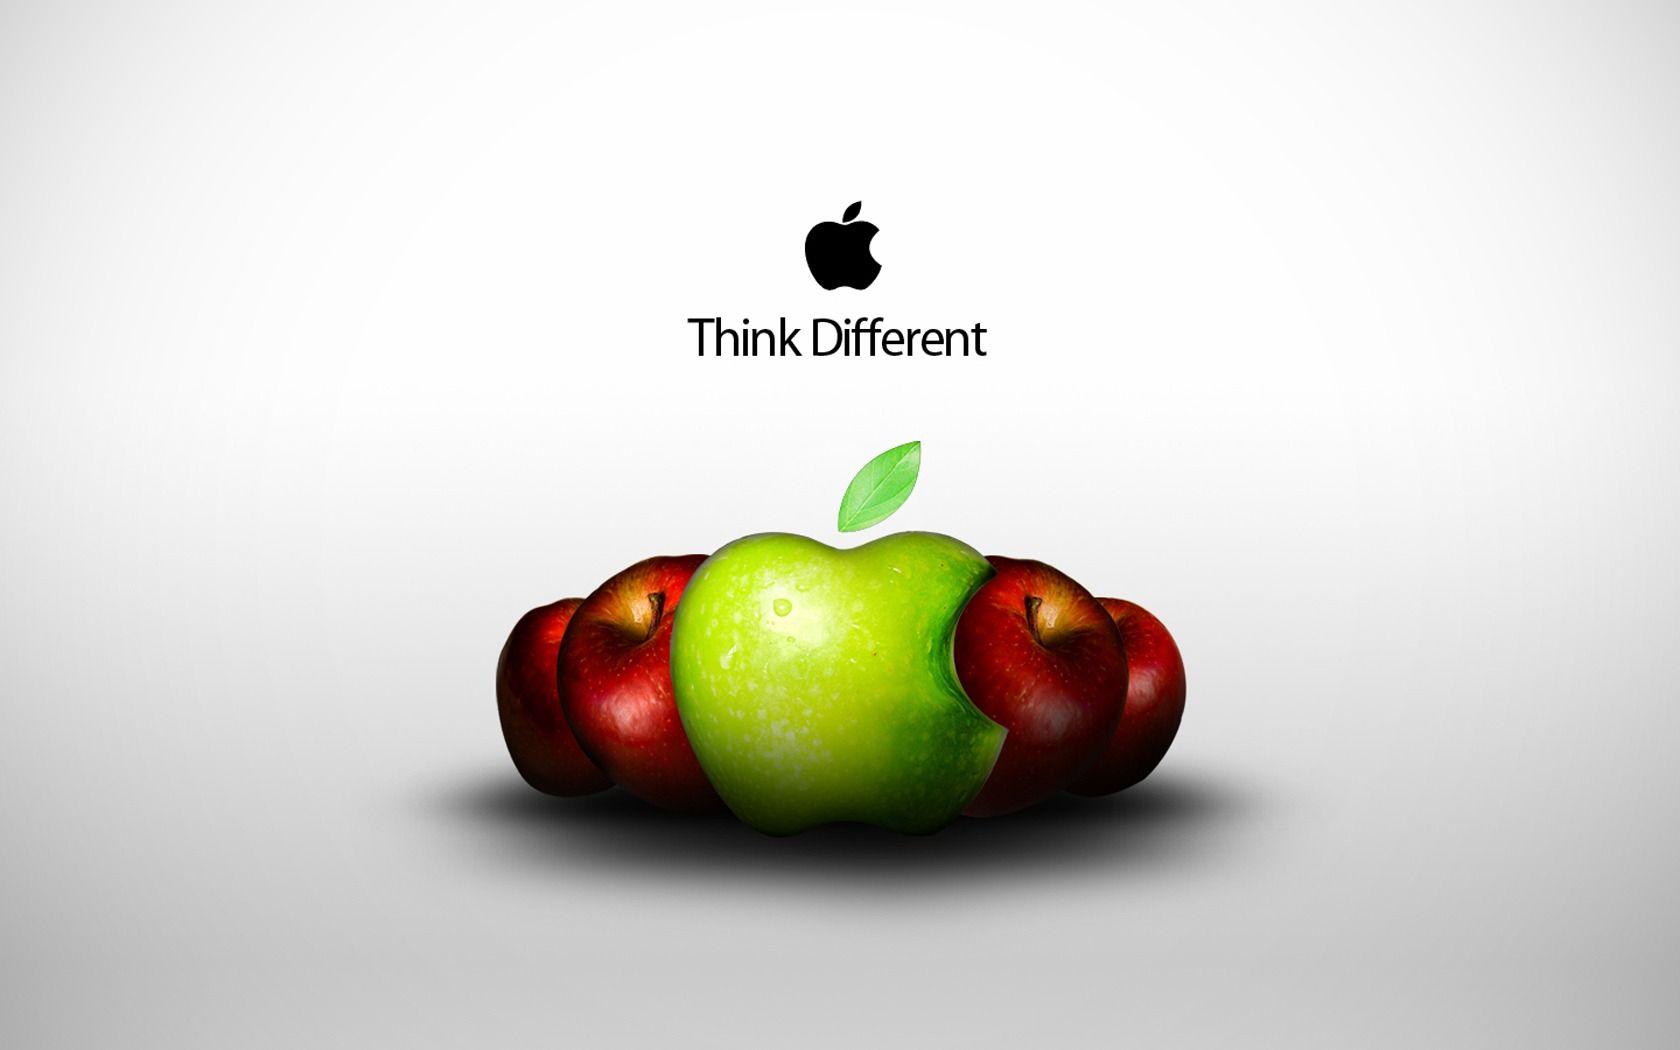 Think Different Wallpaper Mac for Desktop in HD